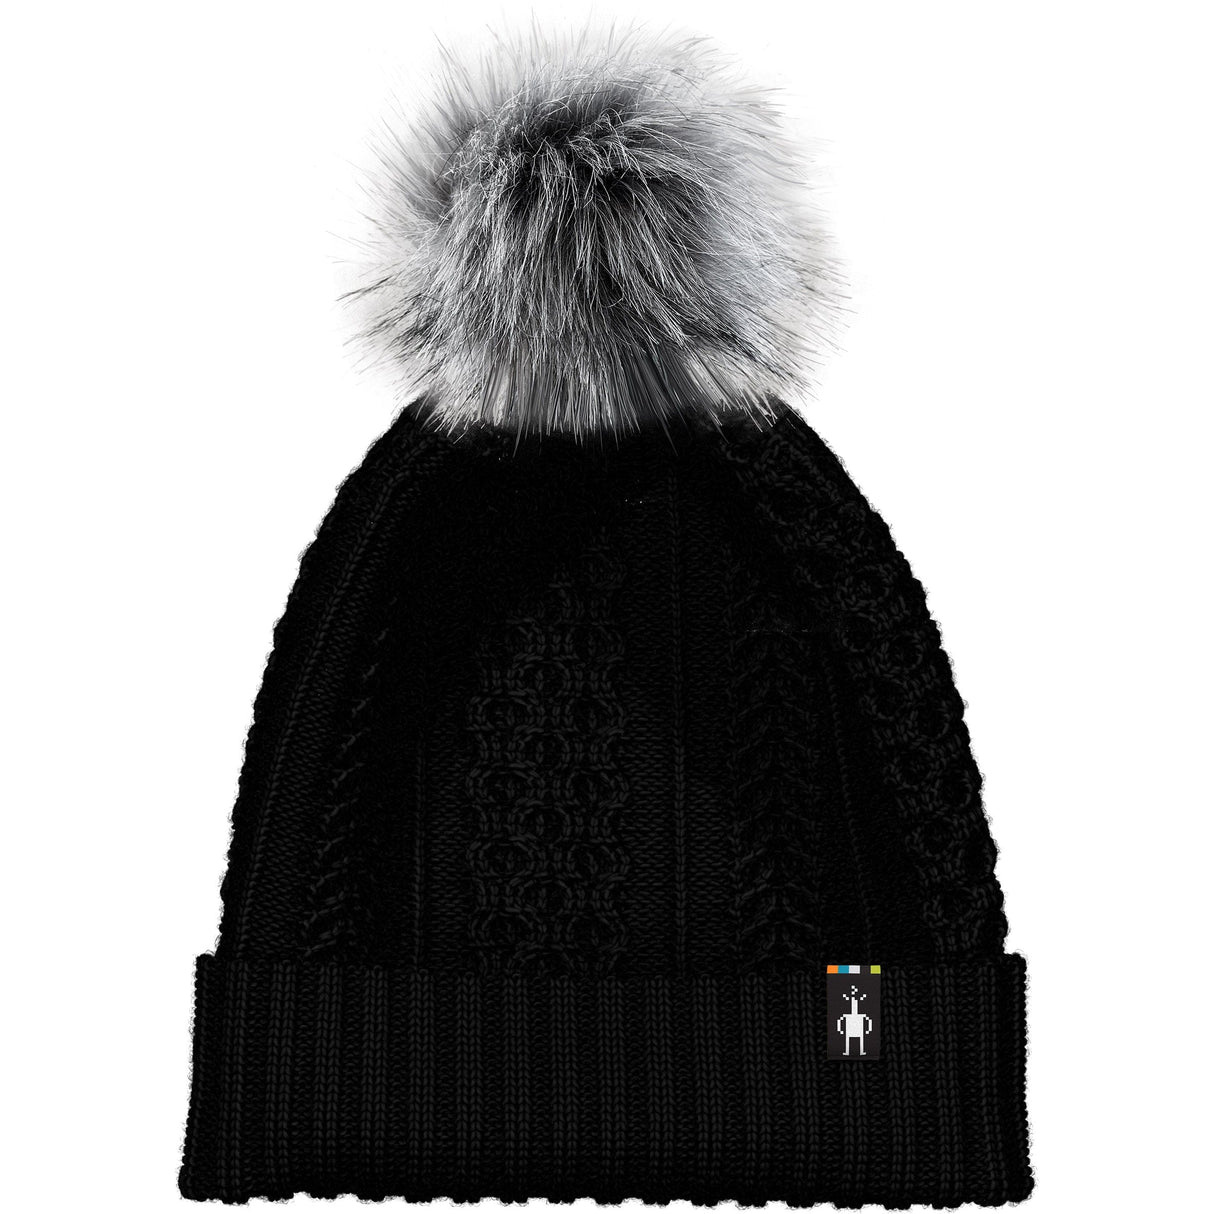 Smartwool Lodge Girl Beanie  -  One Size Fits Most / Black/Light Gray